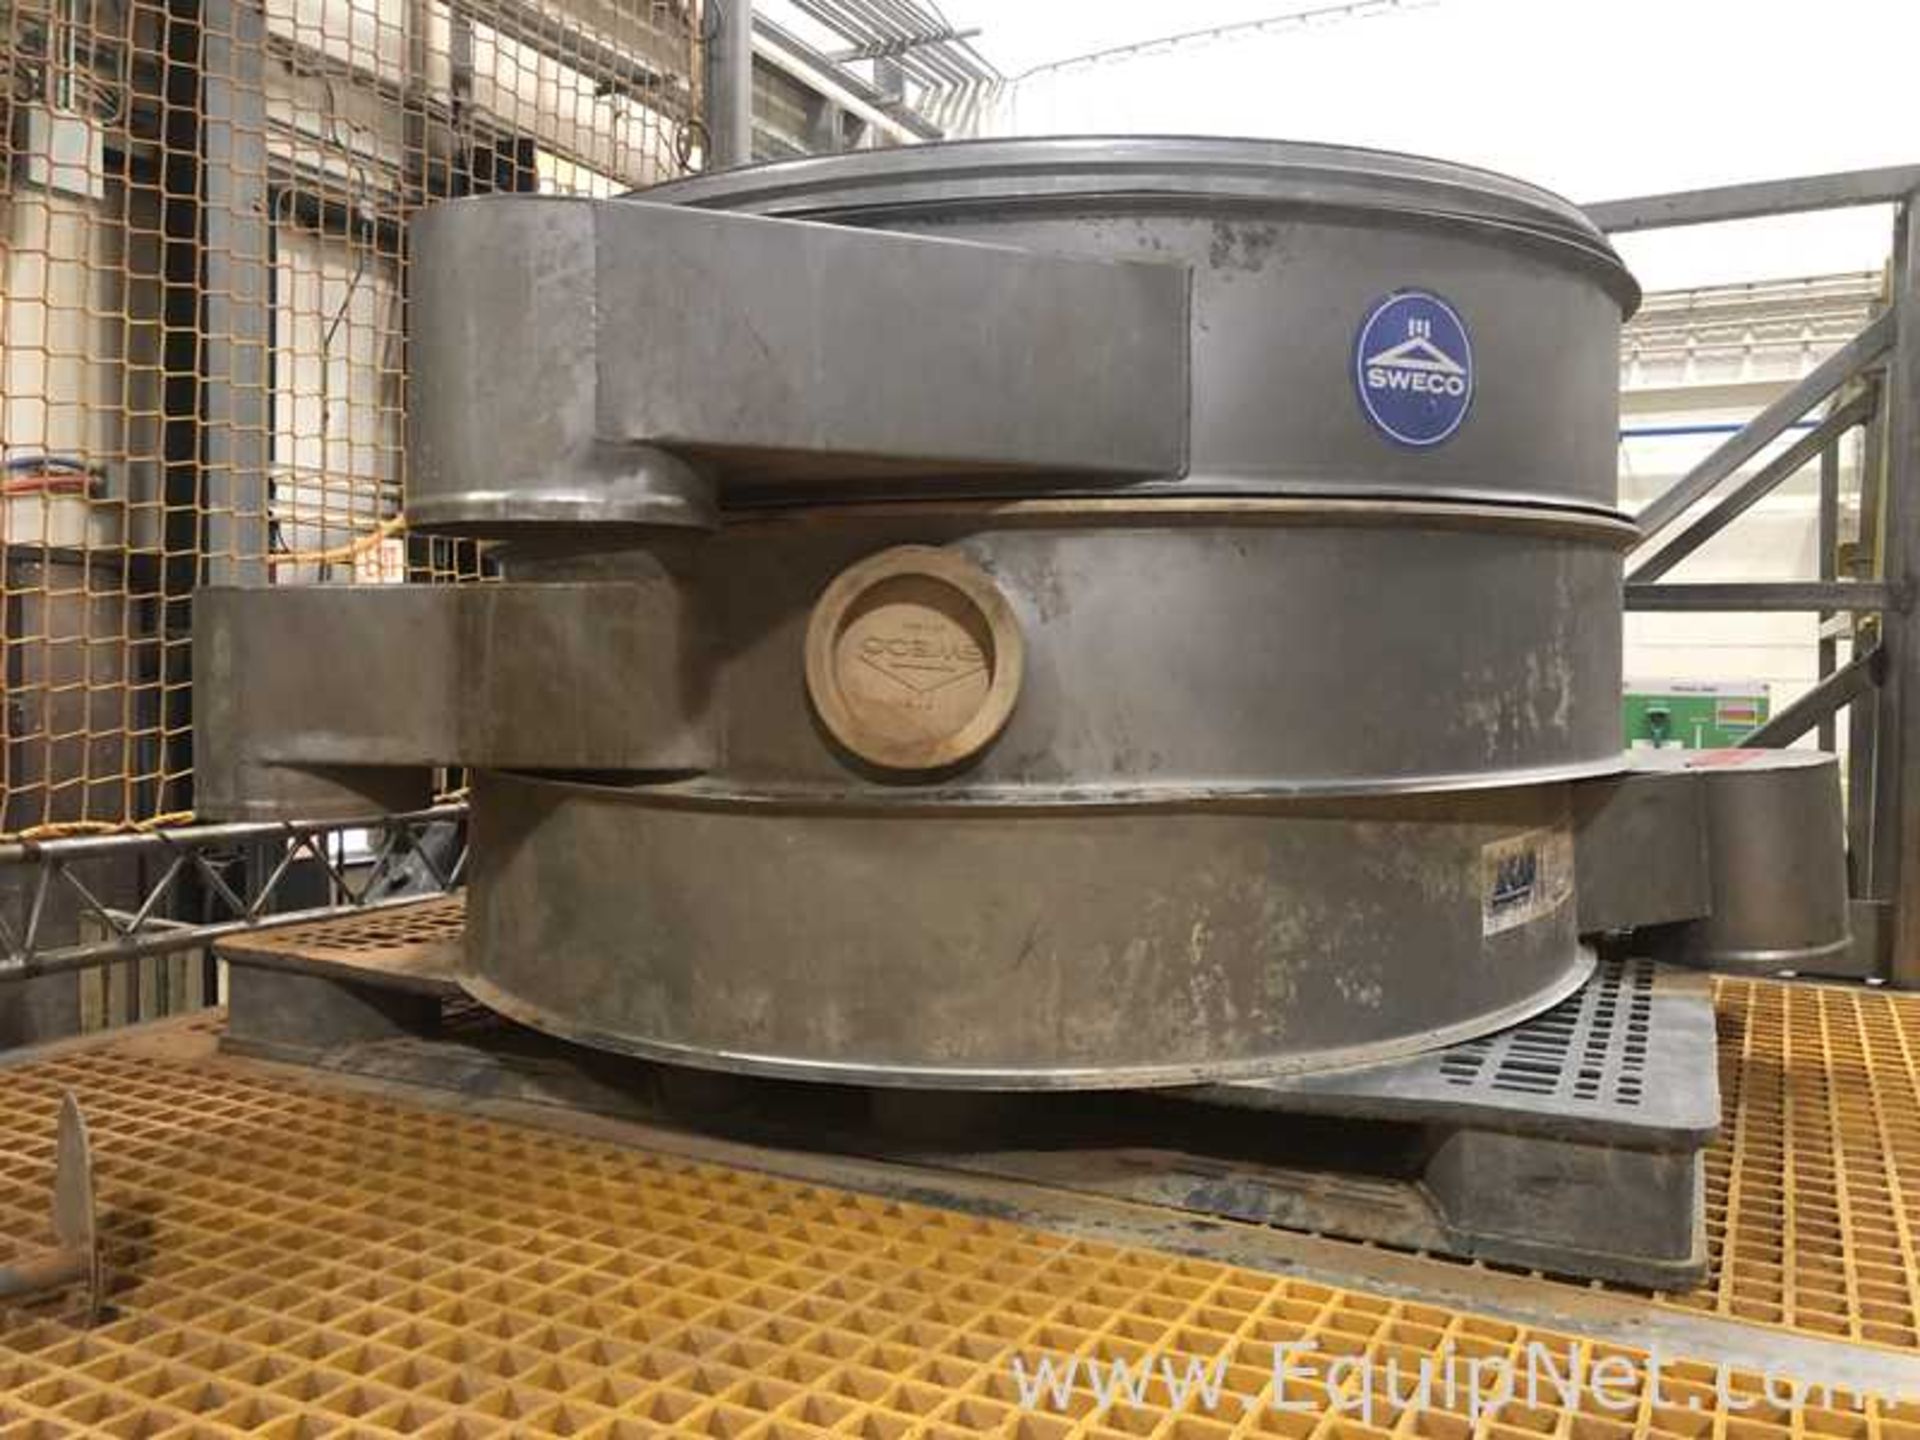 Lot Of Two 48 Inch Sweco Round Separator Sifter Screeners Model XS48S888TLWC - Image 8 of 13